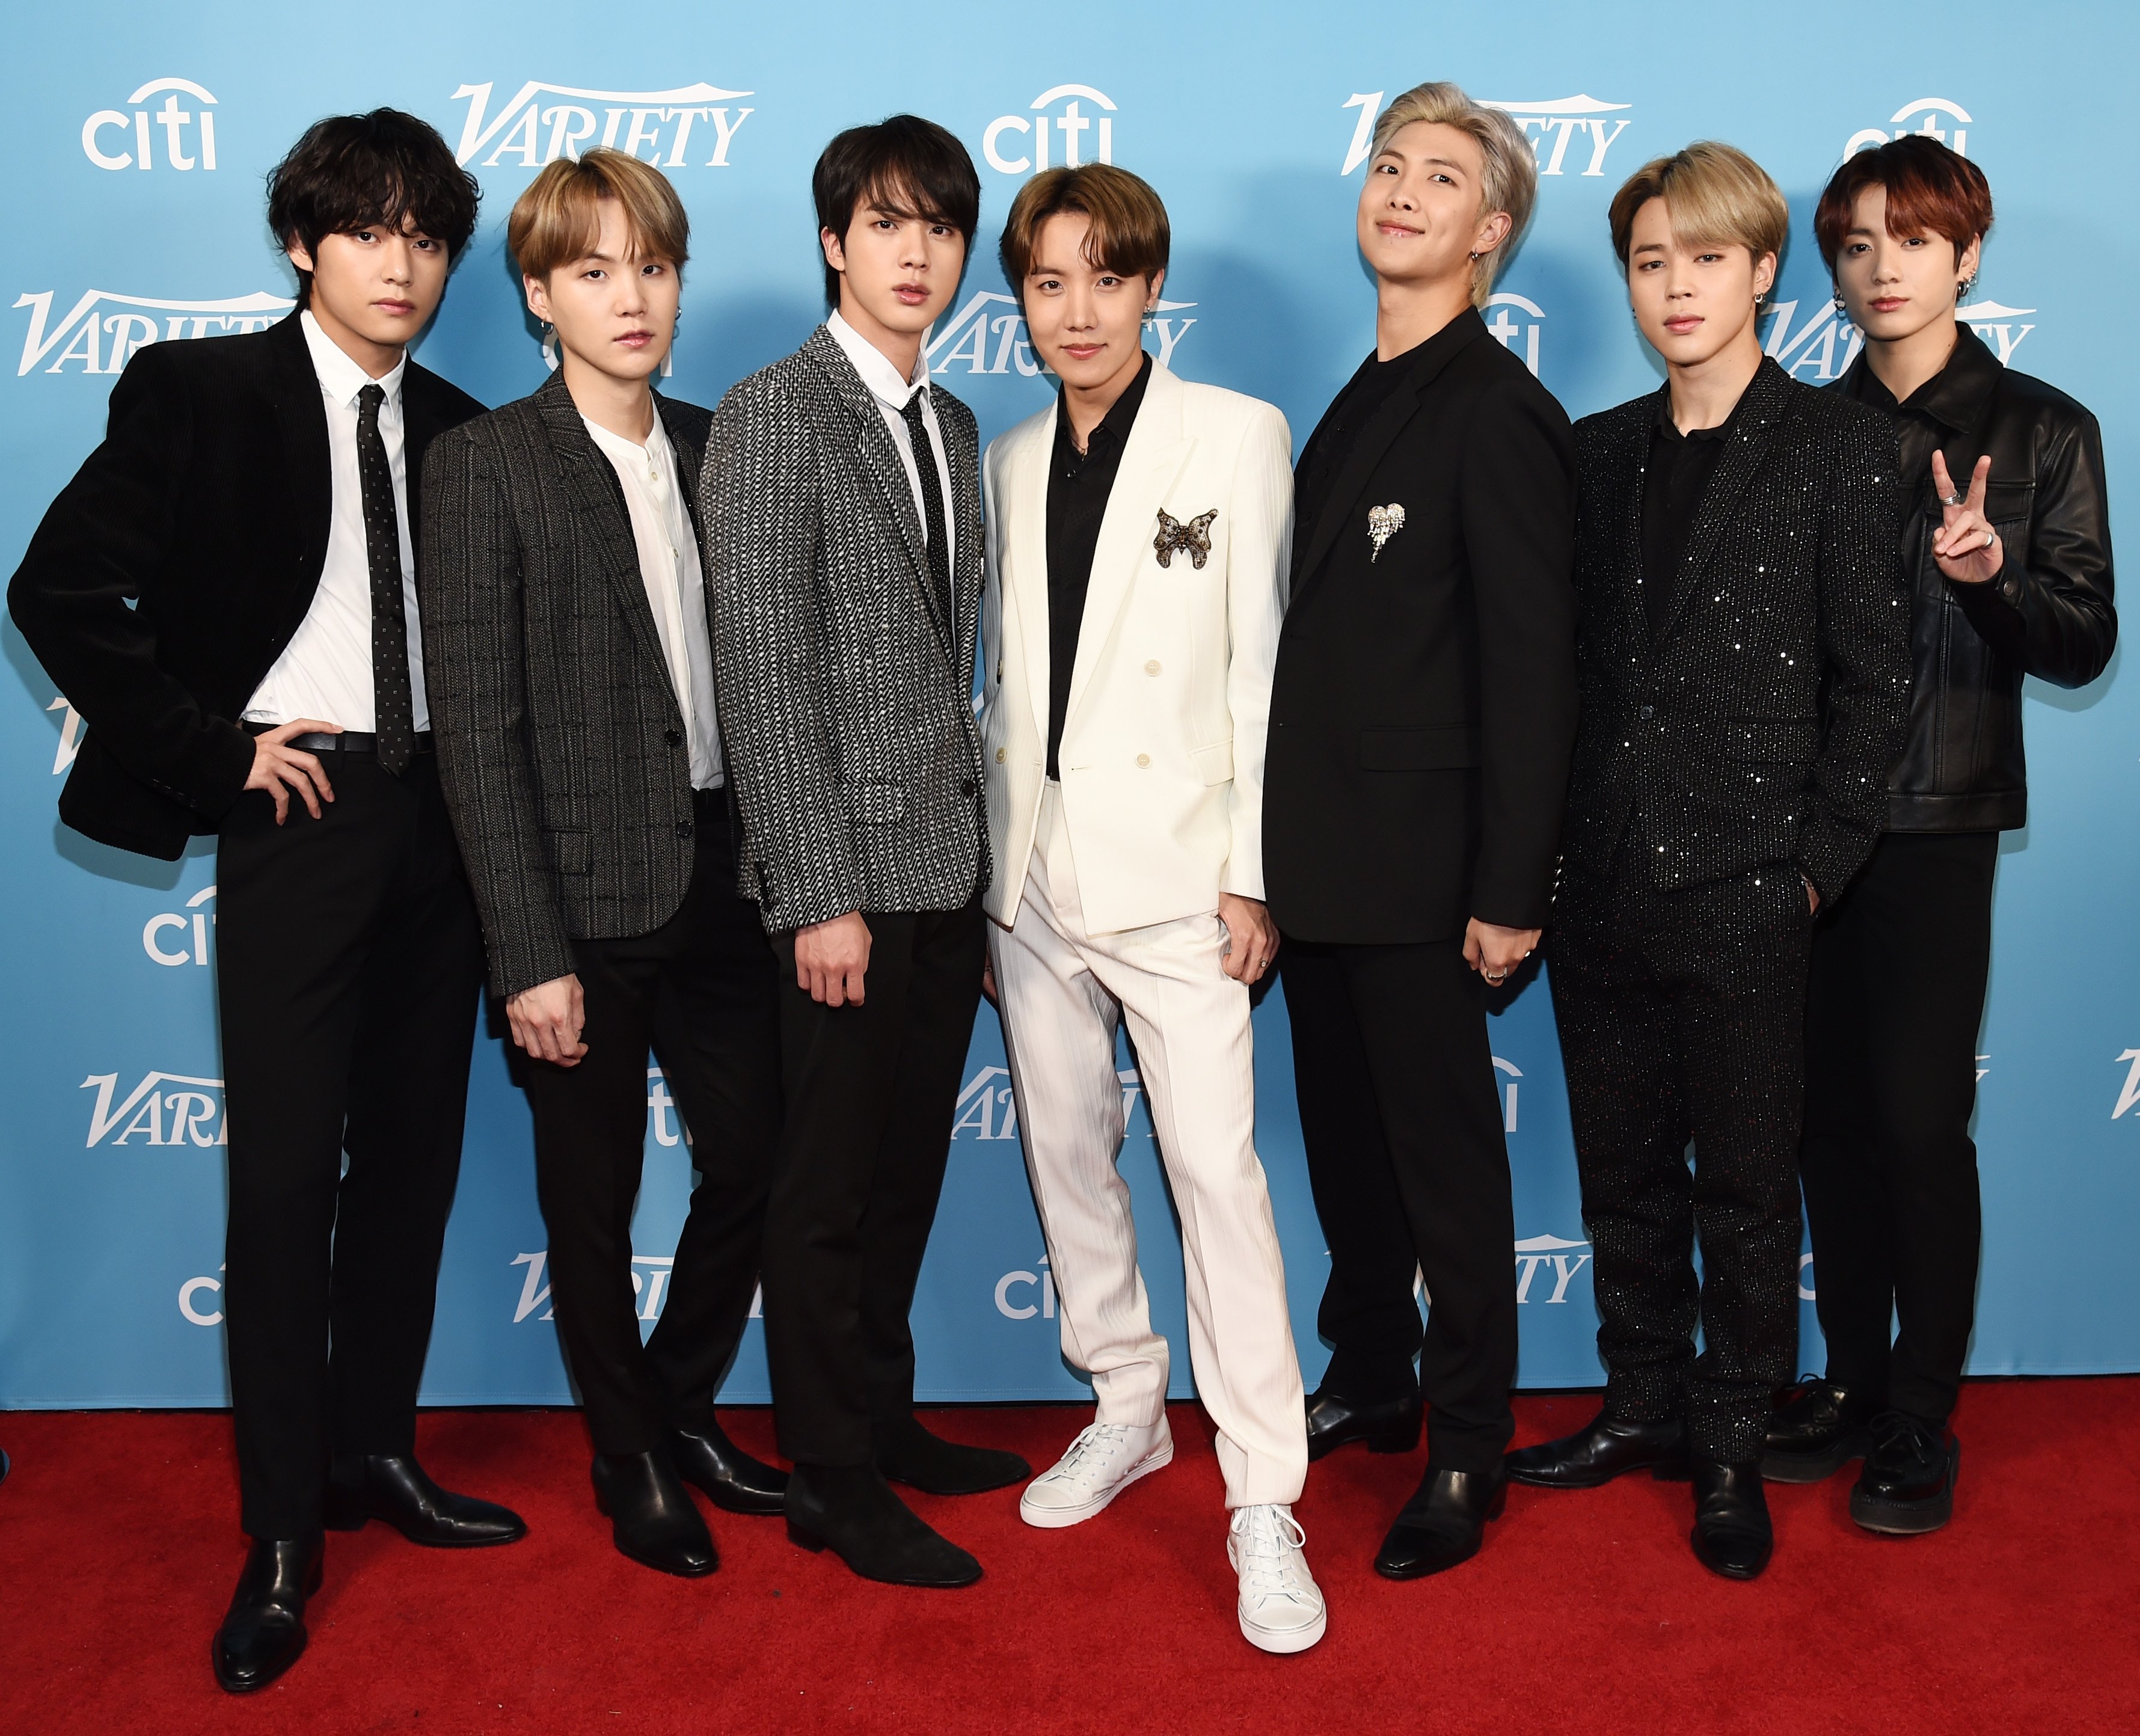 BTS arrives at the 2019 Variety's Hitmakers Brunch 